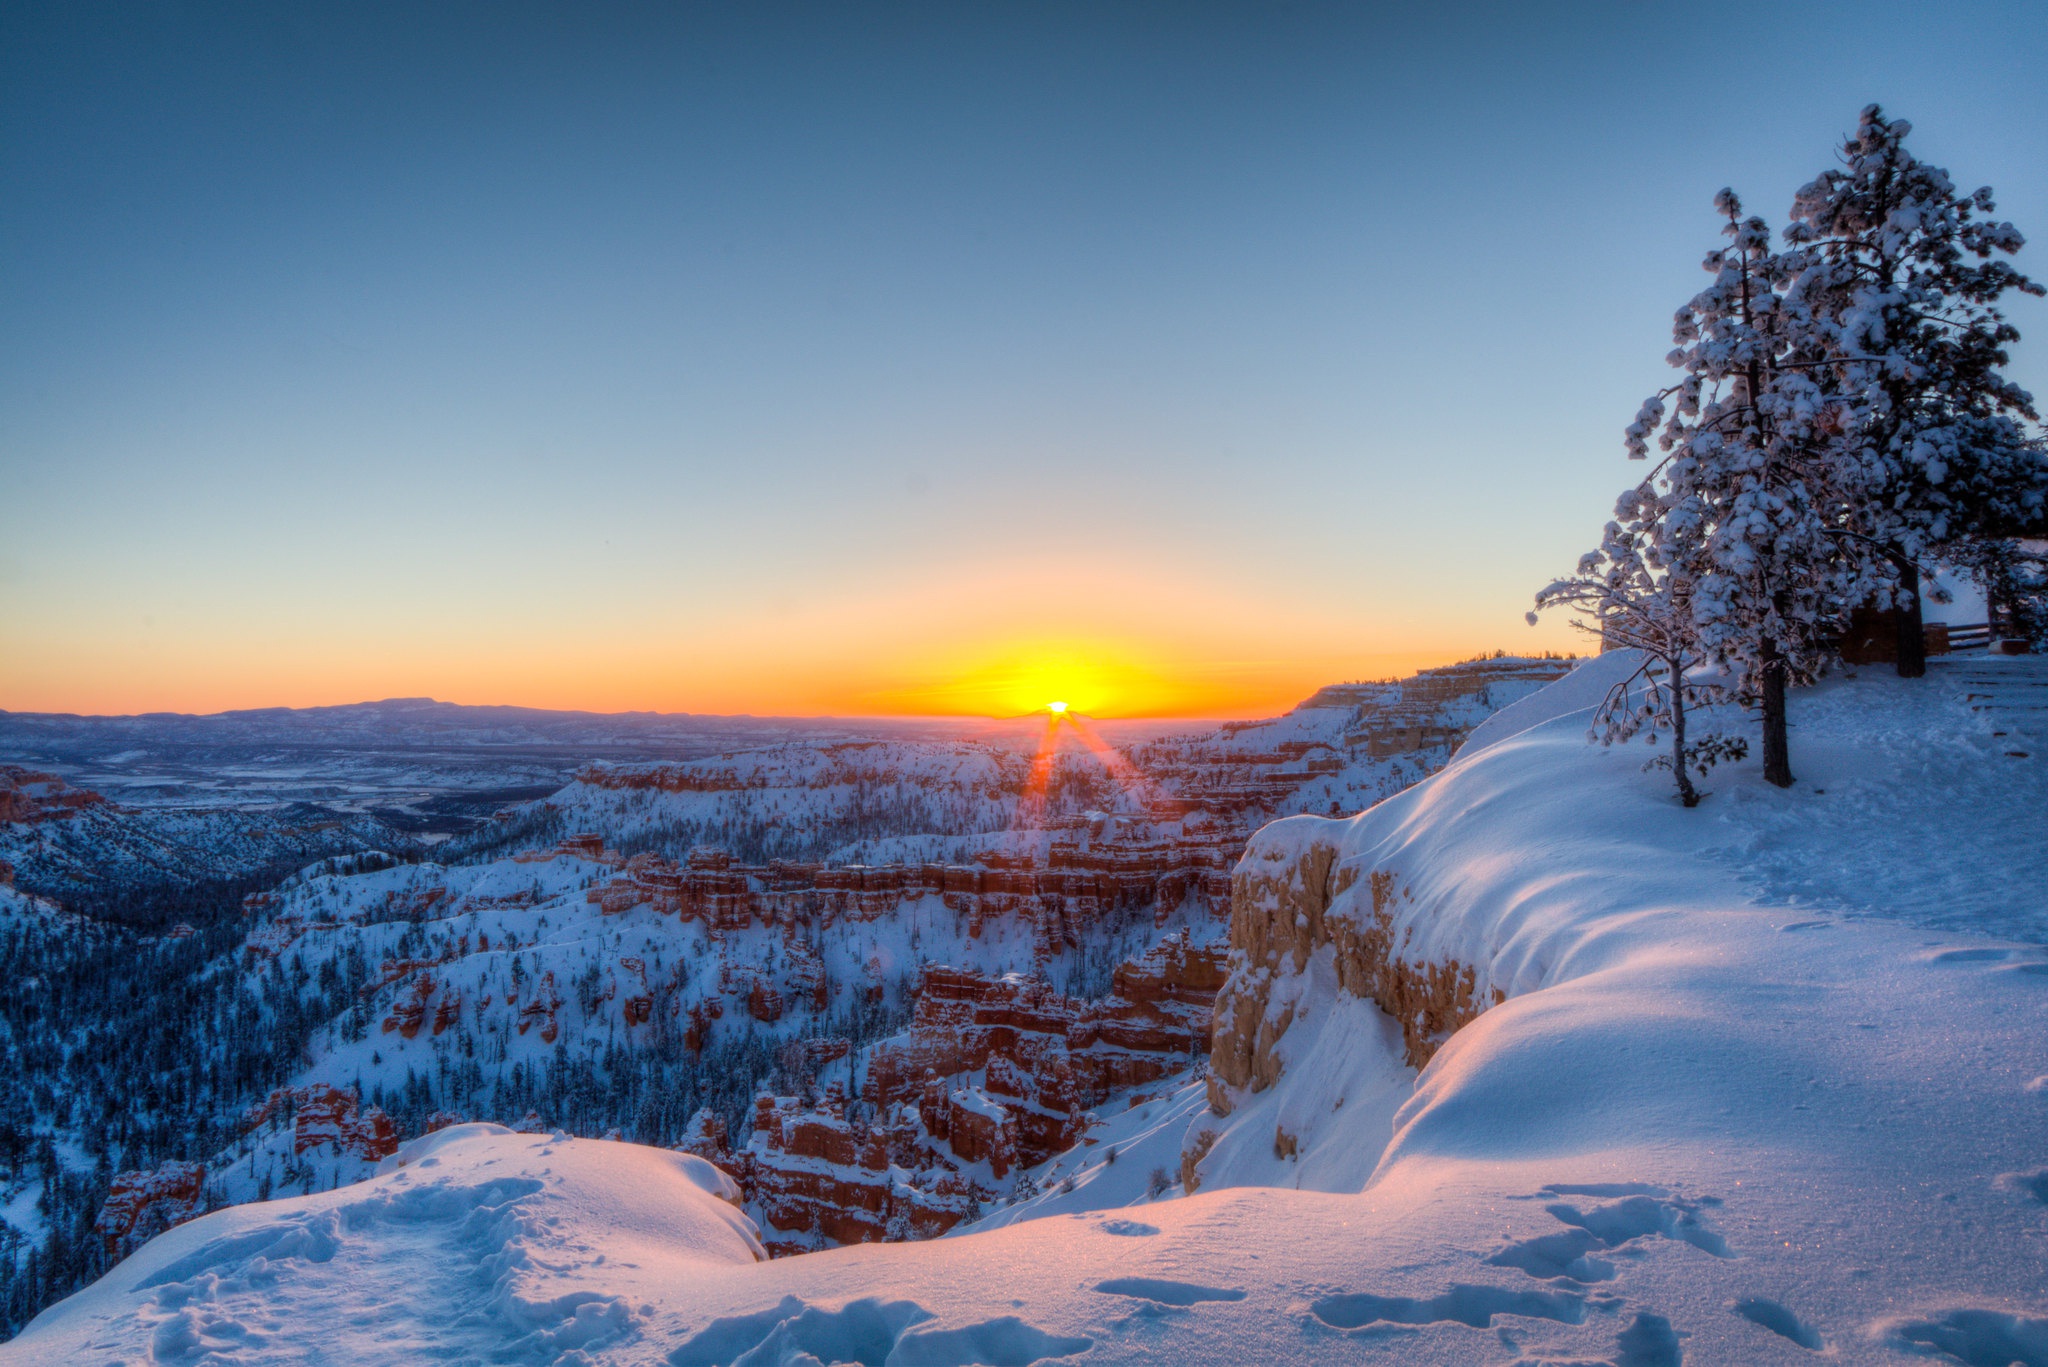 General 2048x1367 nature winter landscape snow sunlight Bryce Canyon National Park